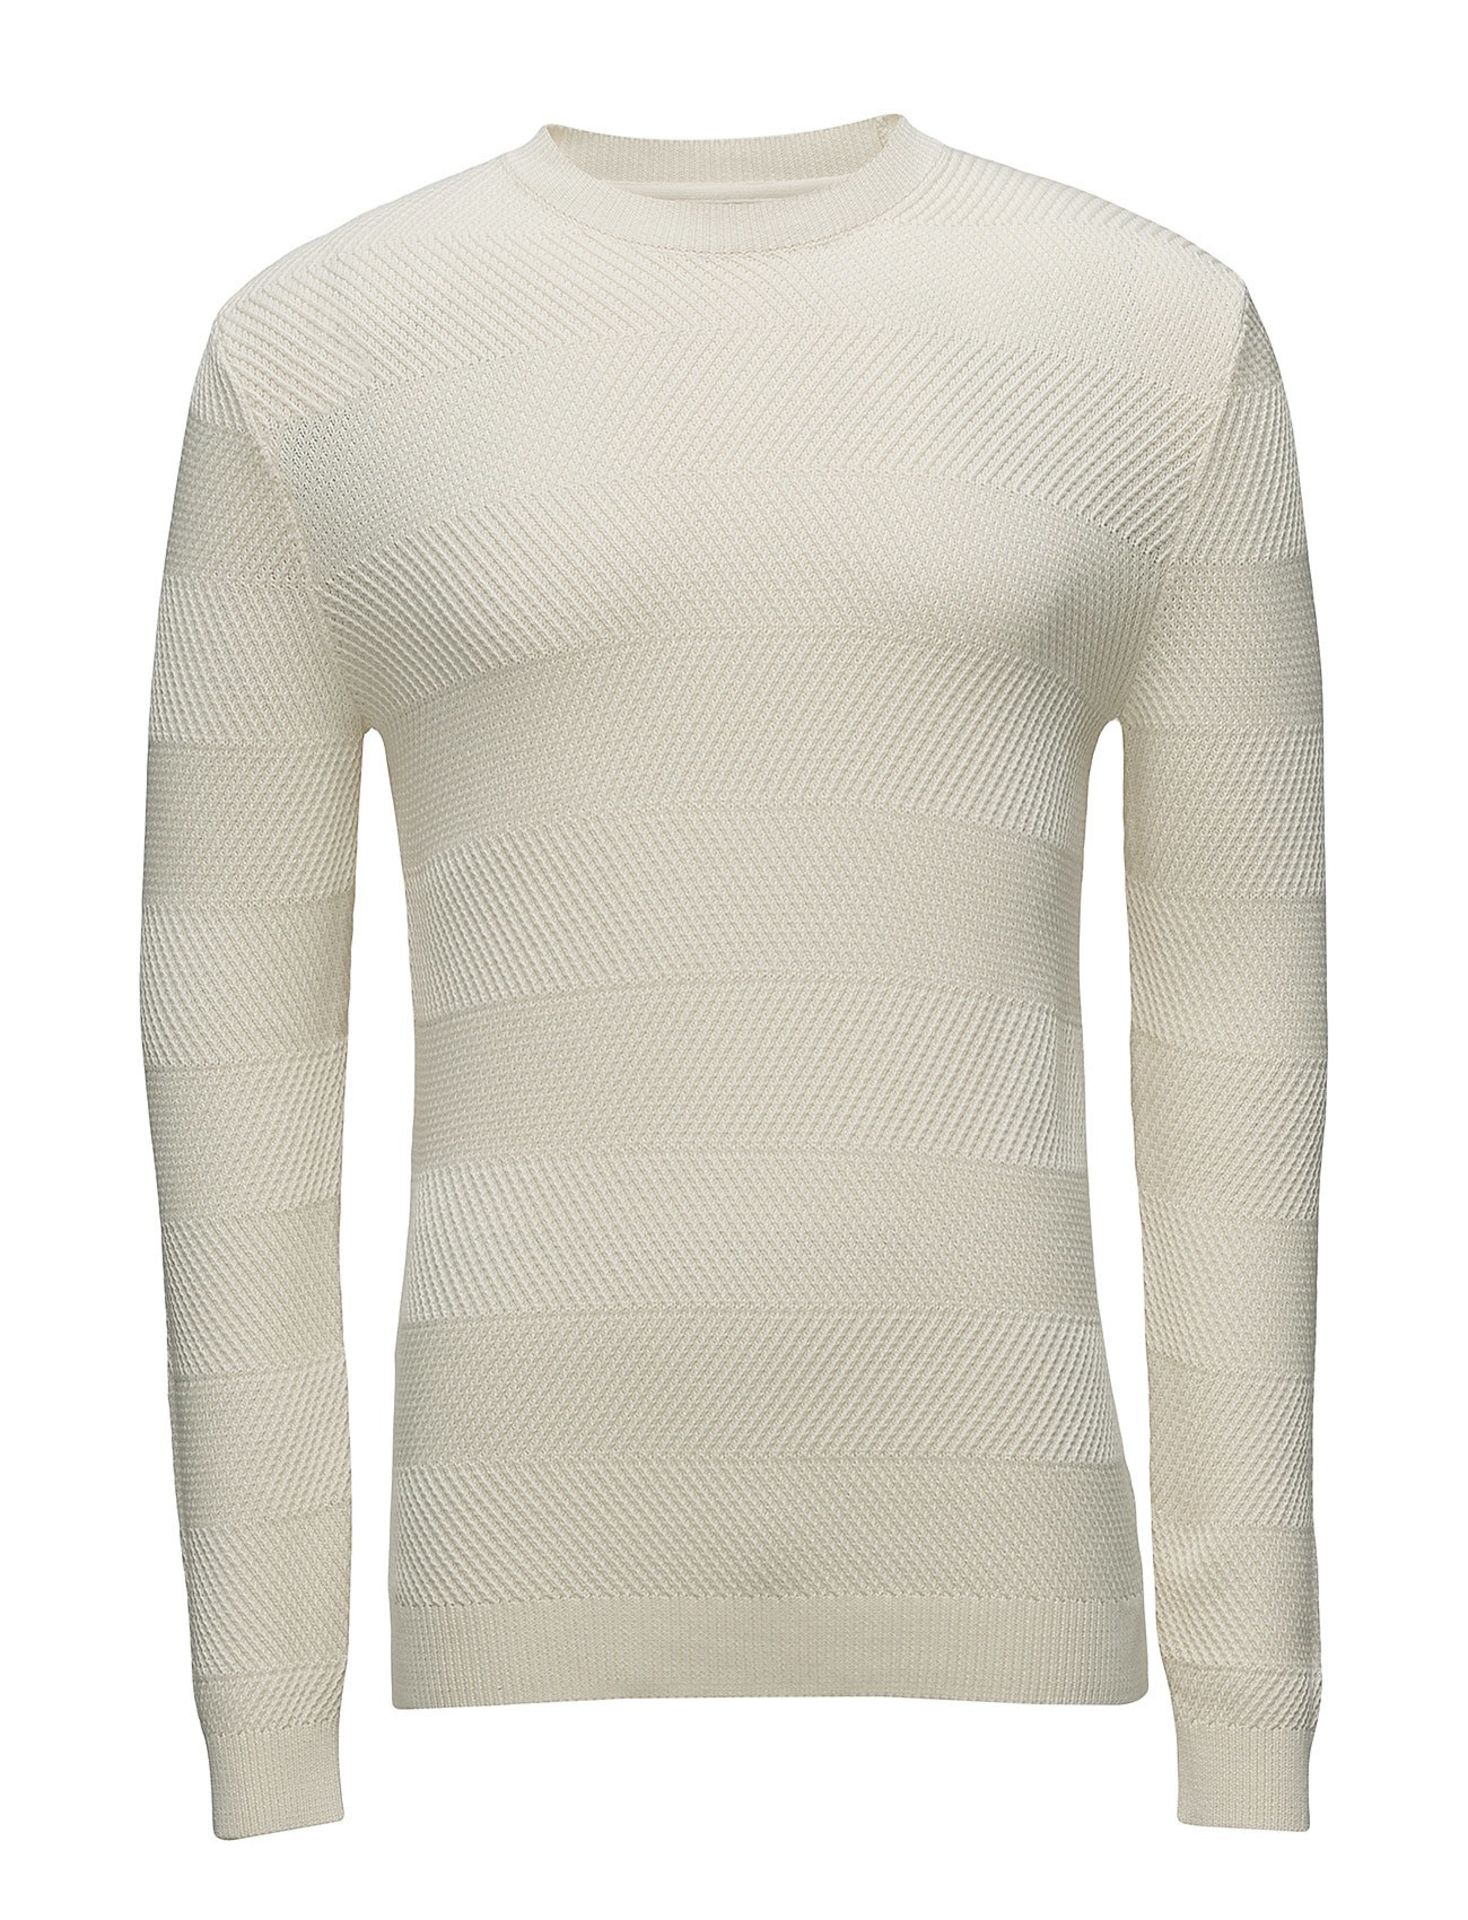 Selection of Leisure and Sportswear. Size Small. Total RRP £198.50. See description. - Image 4 of 9